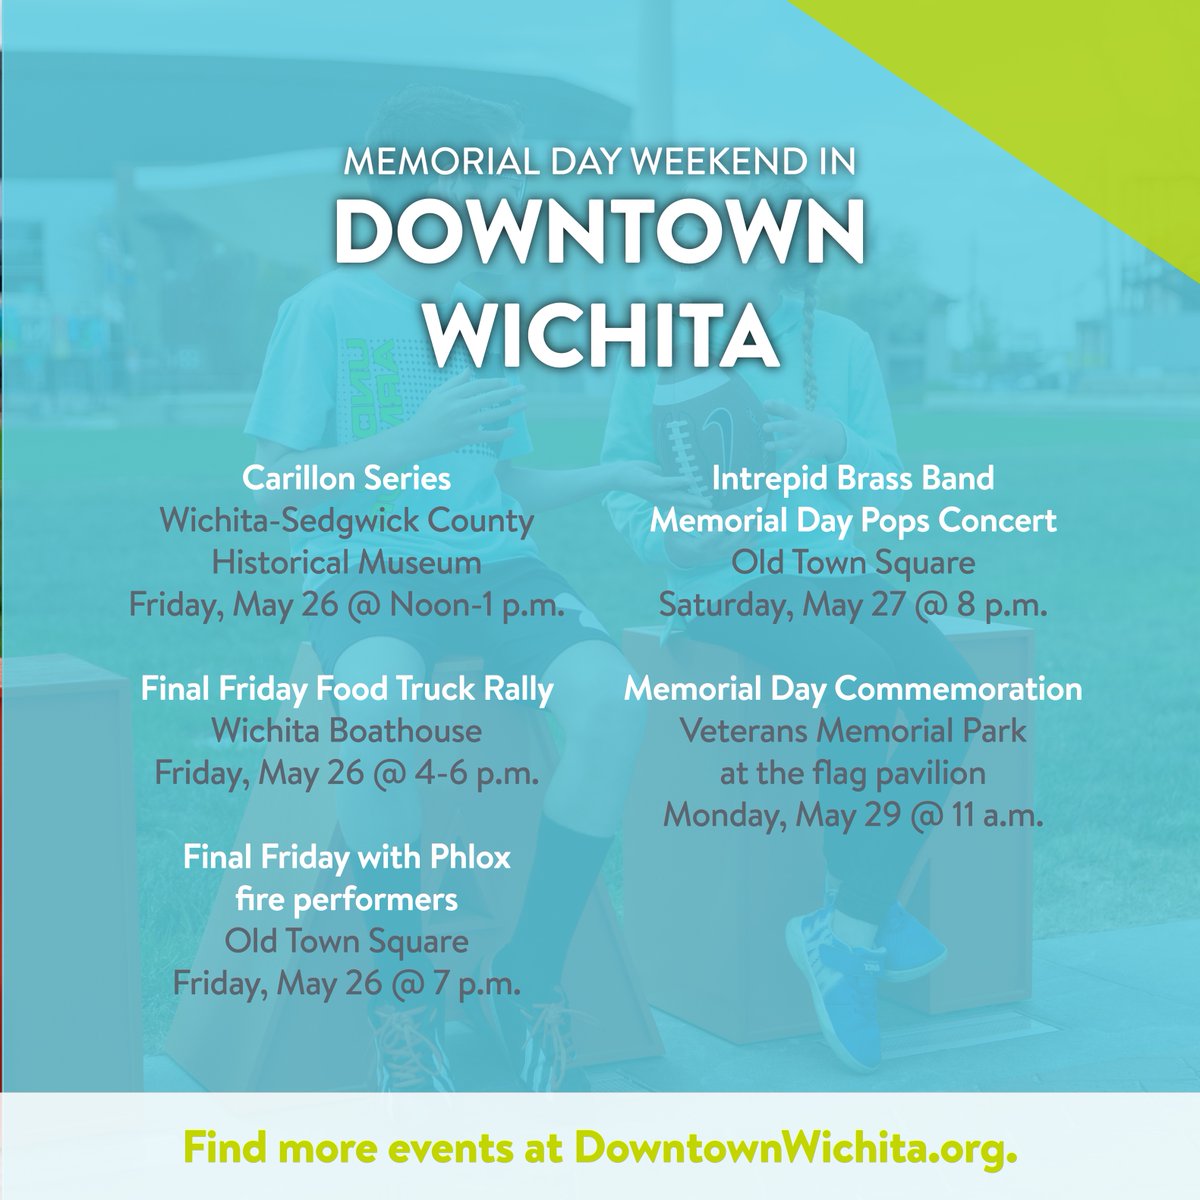 Spend the holiday weekend in #DowntownWeekend! 🇺🇸 Find this weekend's events and more at DowntownWichita.org.